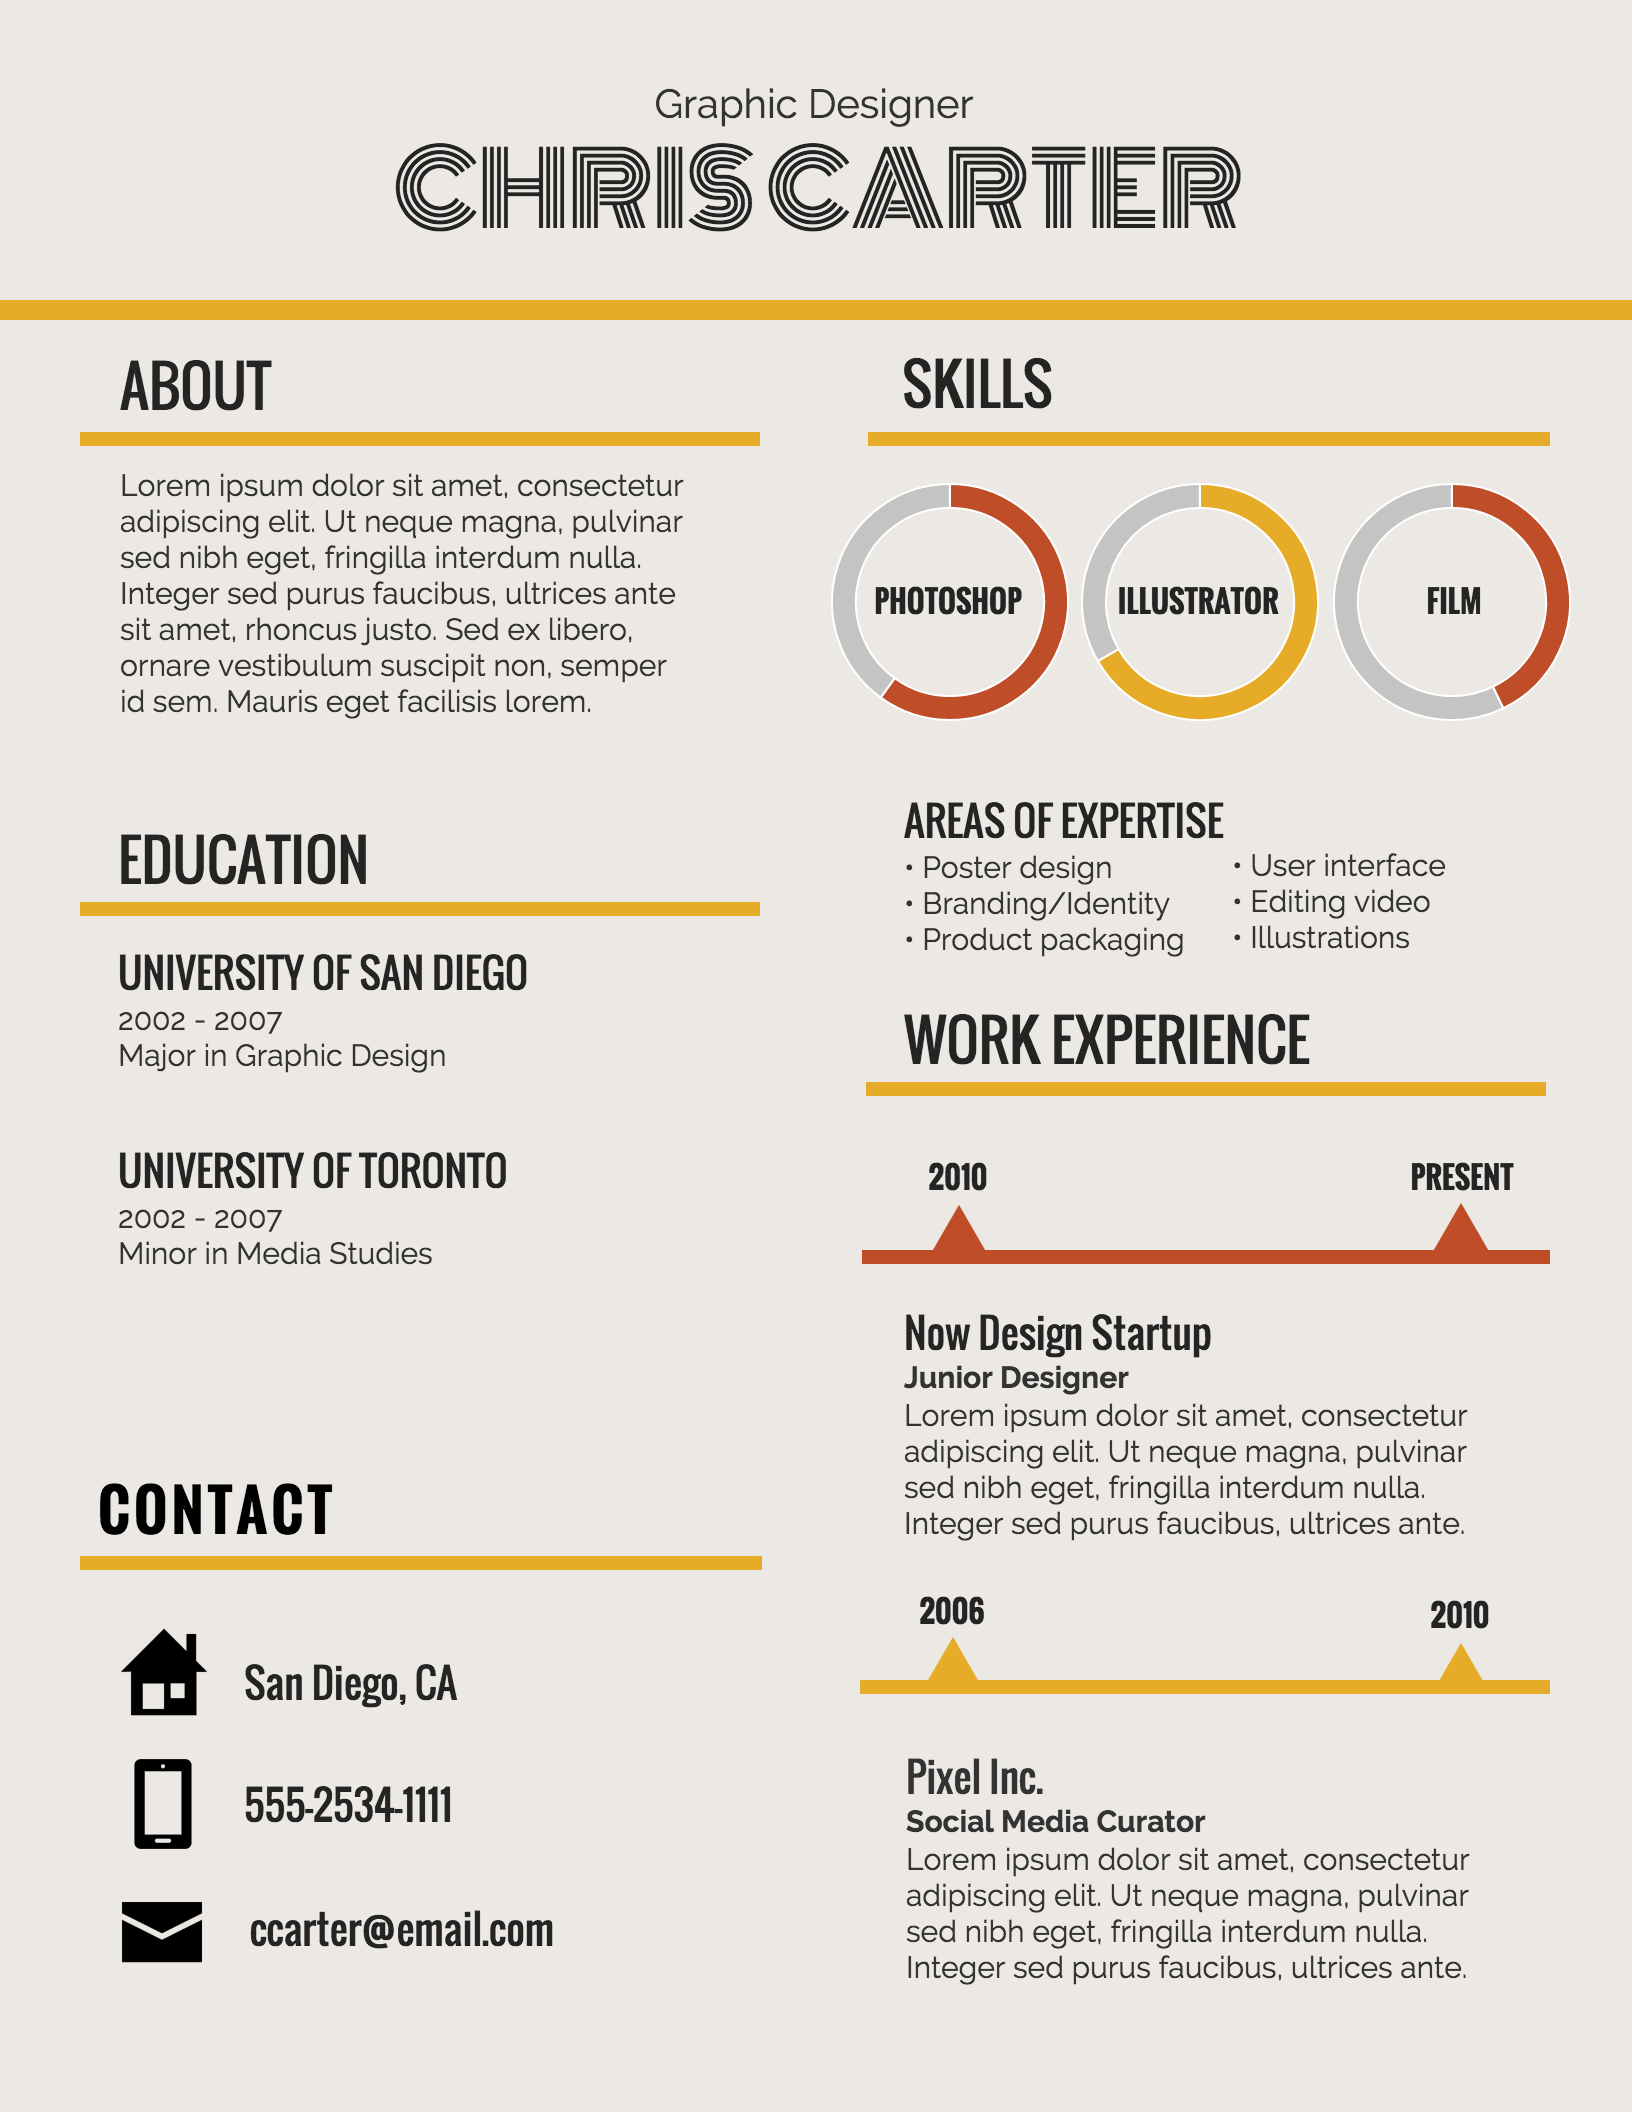 Top 5 Infographic Resume Templates 2020 | Infographic resume template, Infographic resume ...